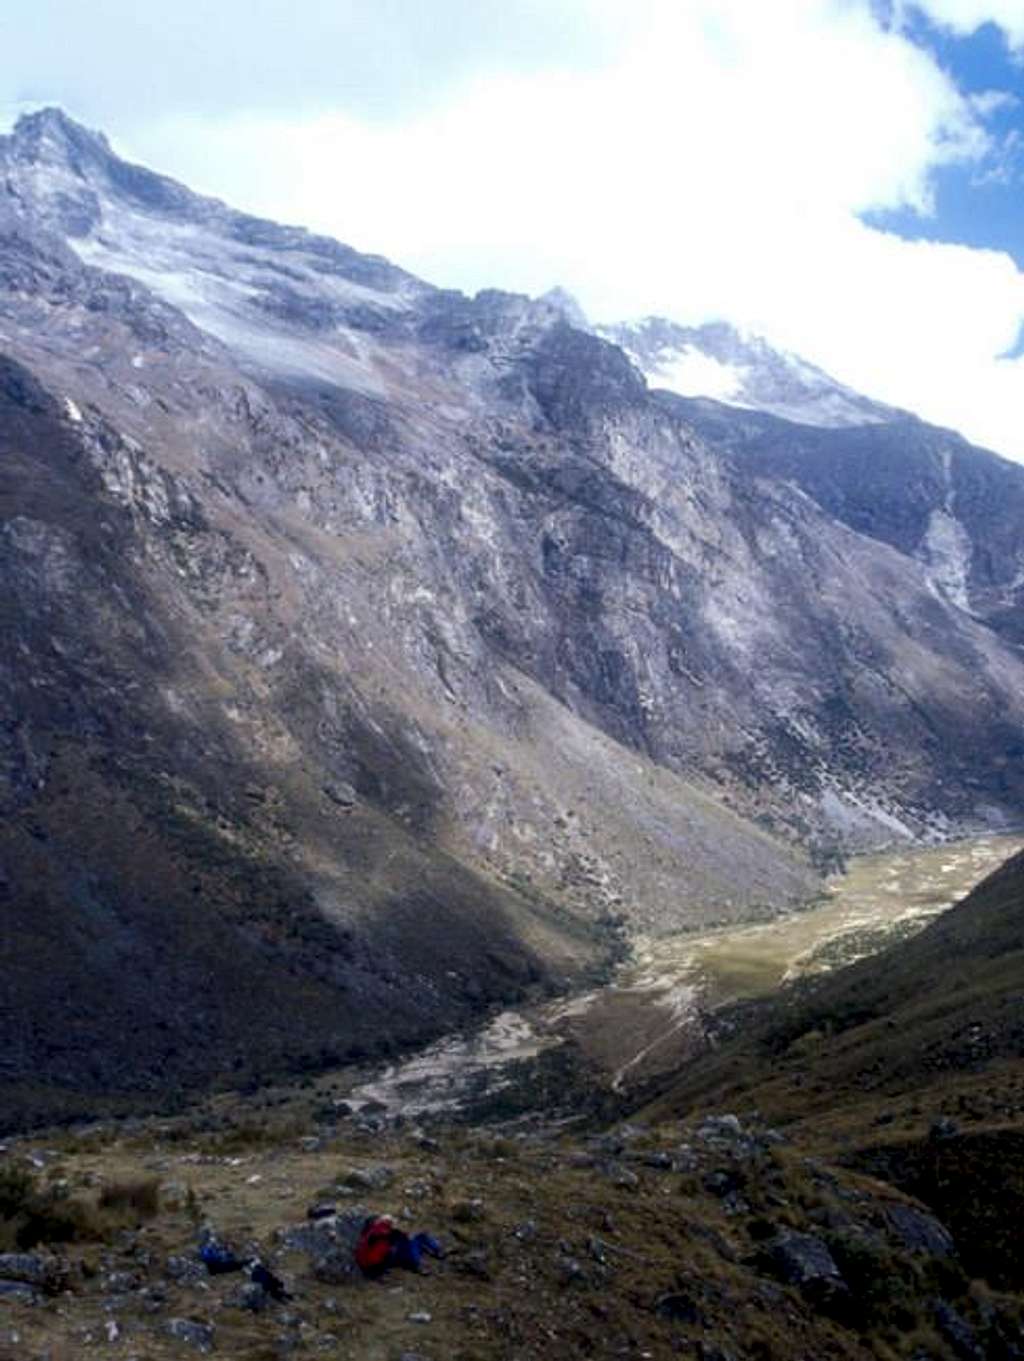 On your way to Taullipampa, a...